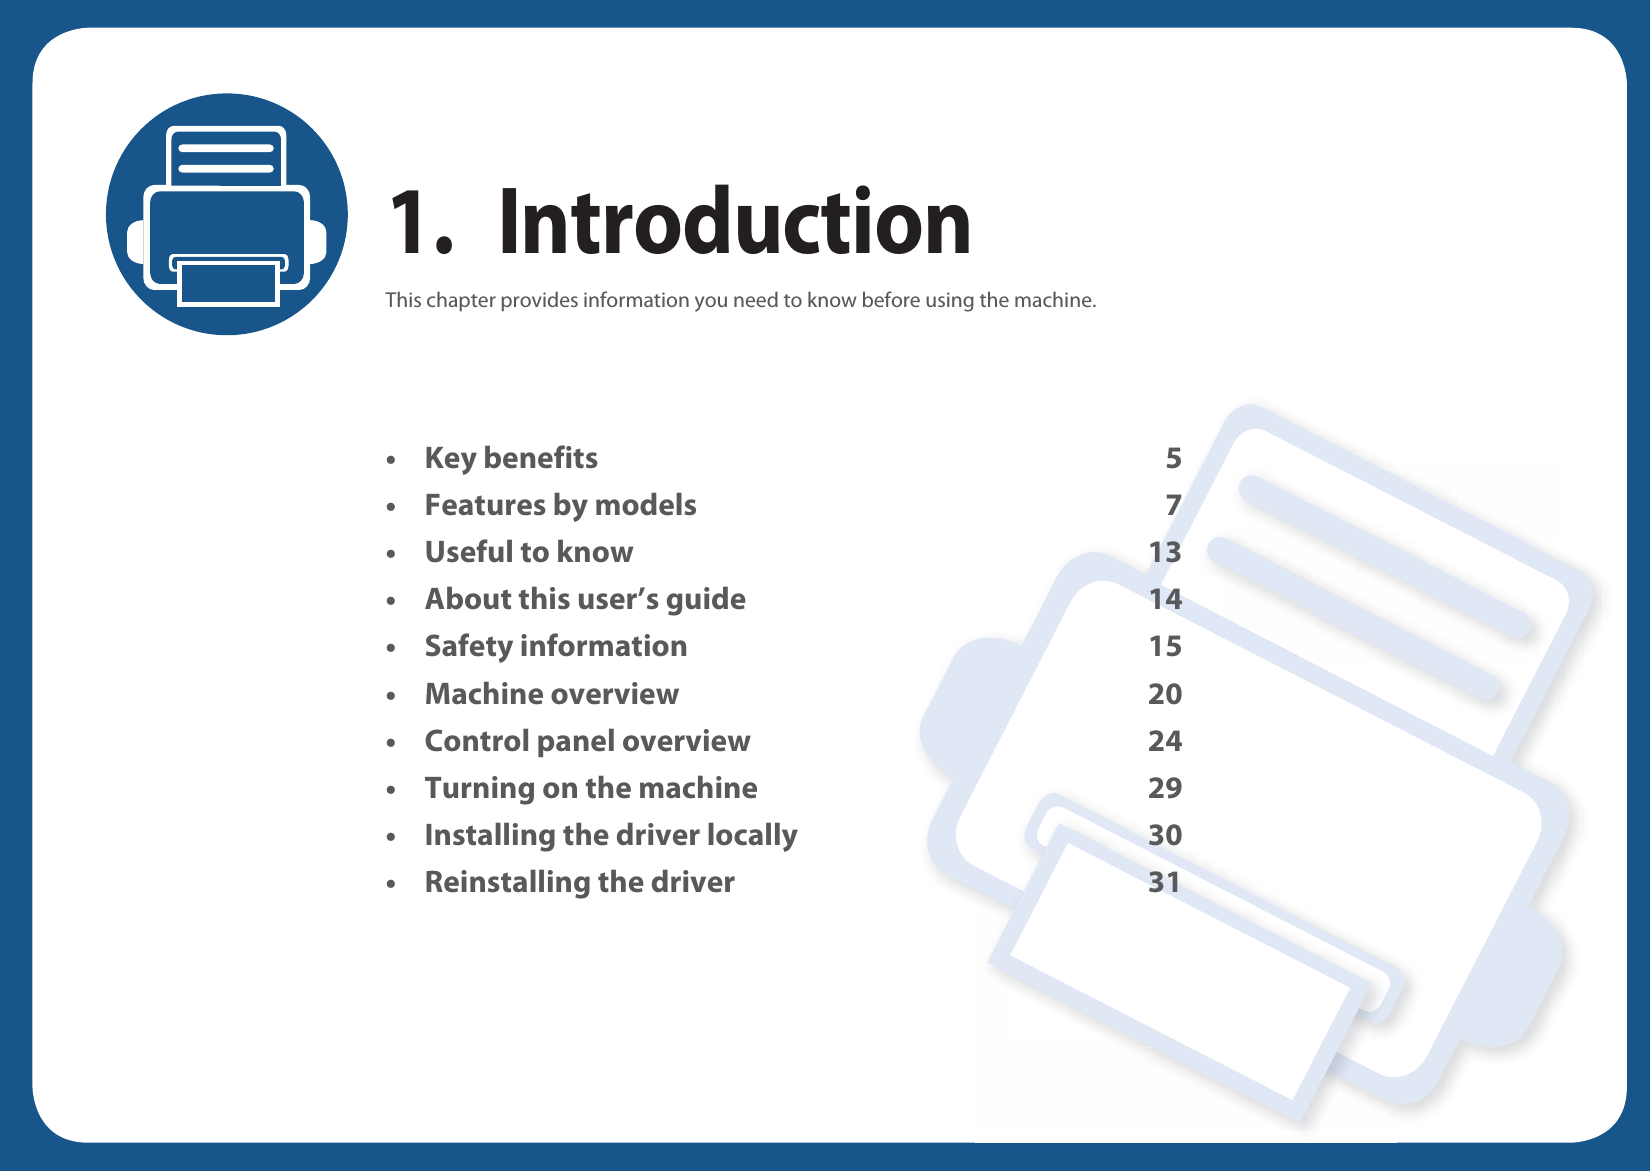 1. IntroductionThis chapter provides information you need to know before using the machine.•Key benefits 5• Features by models 7• Useful to know 13• About this user’s guide 14• Safety information 15• Machine overview 20• Control panel overview 24• Turning on the machine 29• Installing the driver locally 30• Reinstalling the driver 31